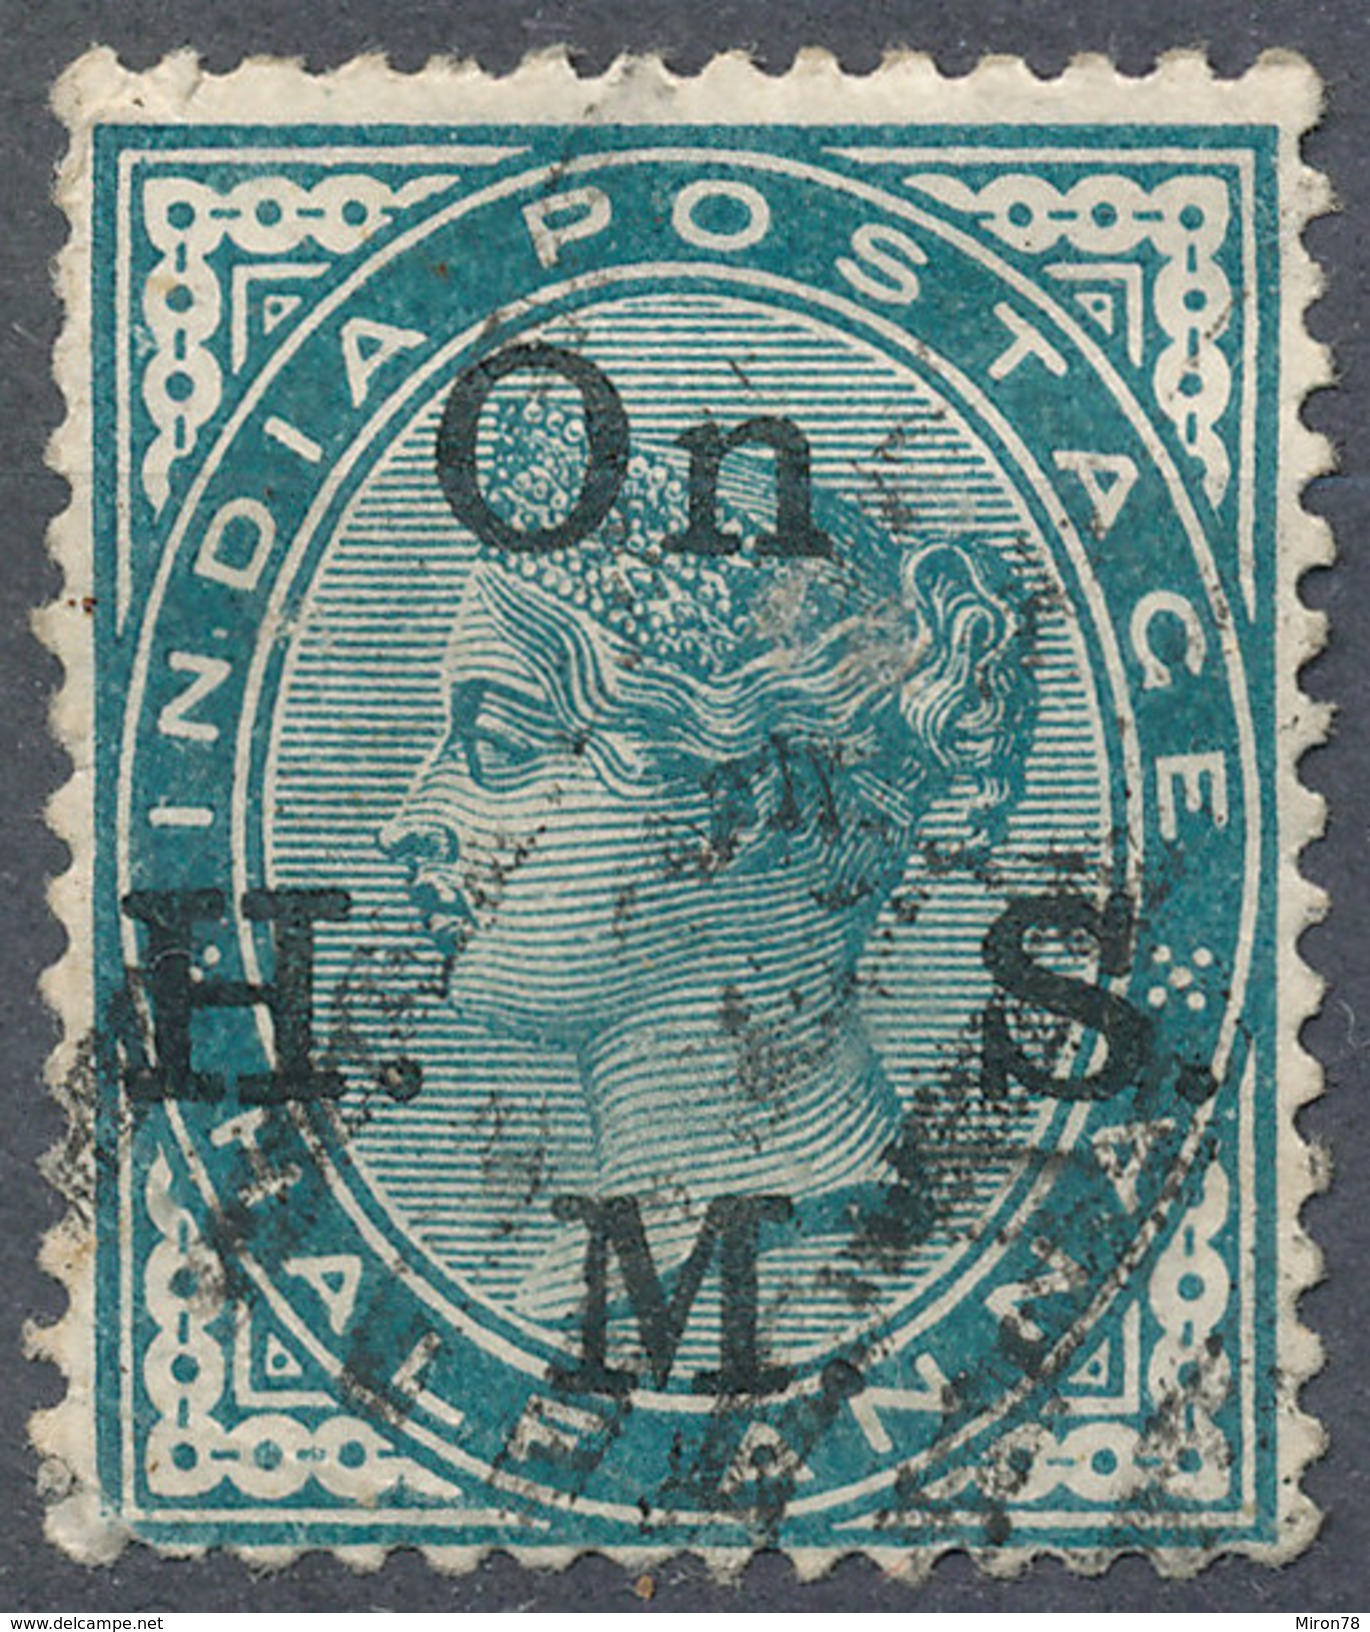 Stamp   India   Queen Victoria Used Lot#34 - 1852 Sind Province